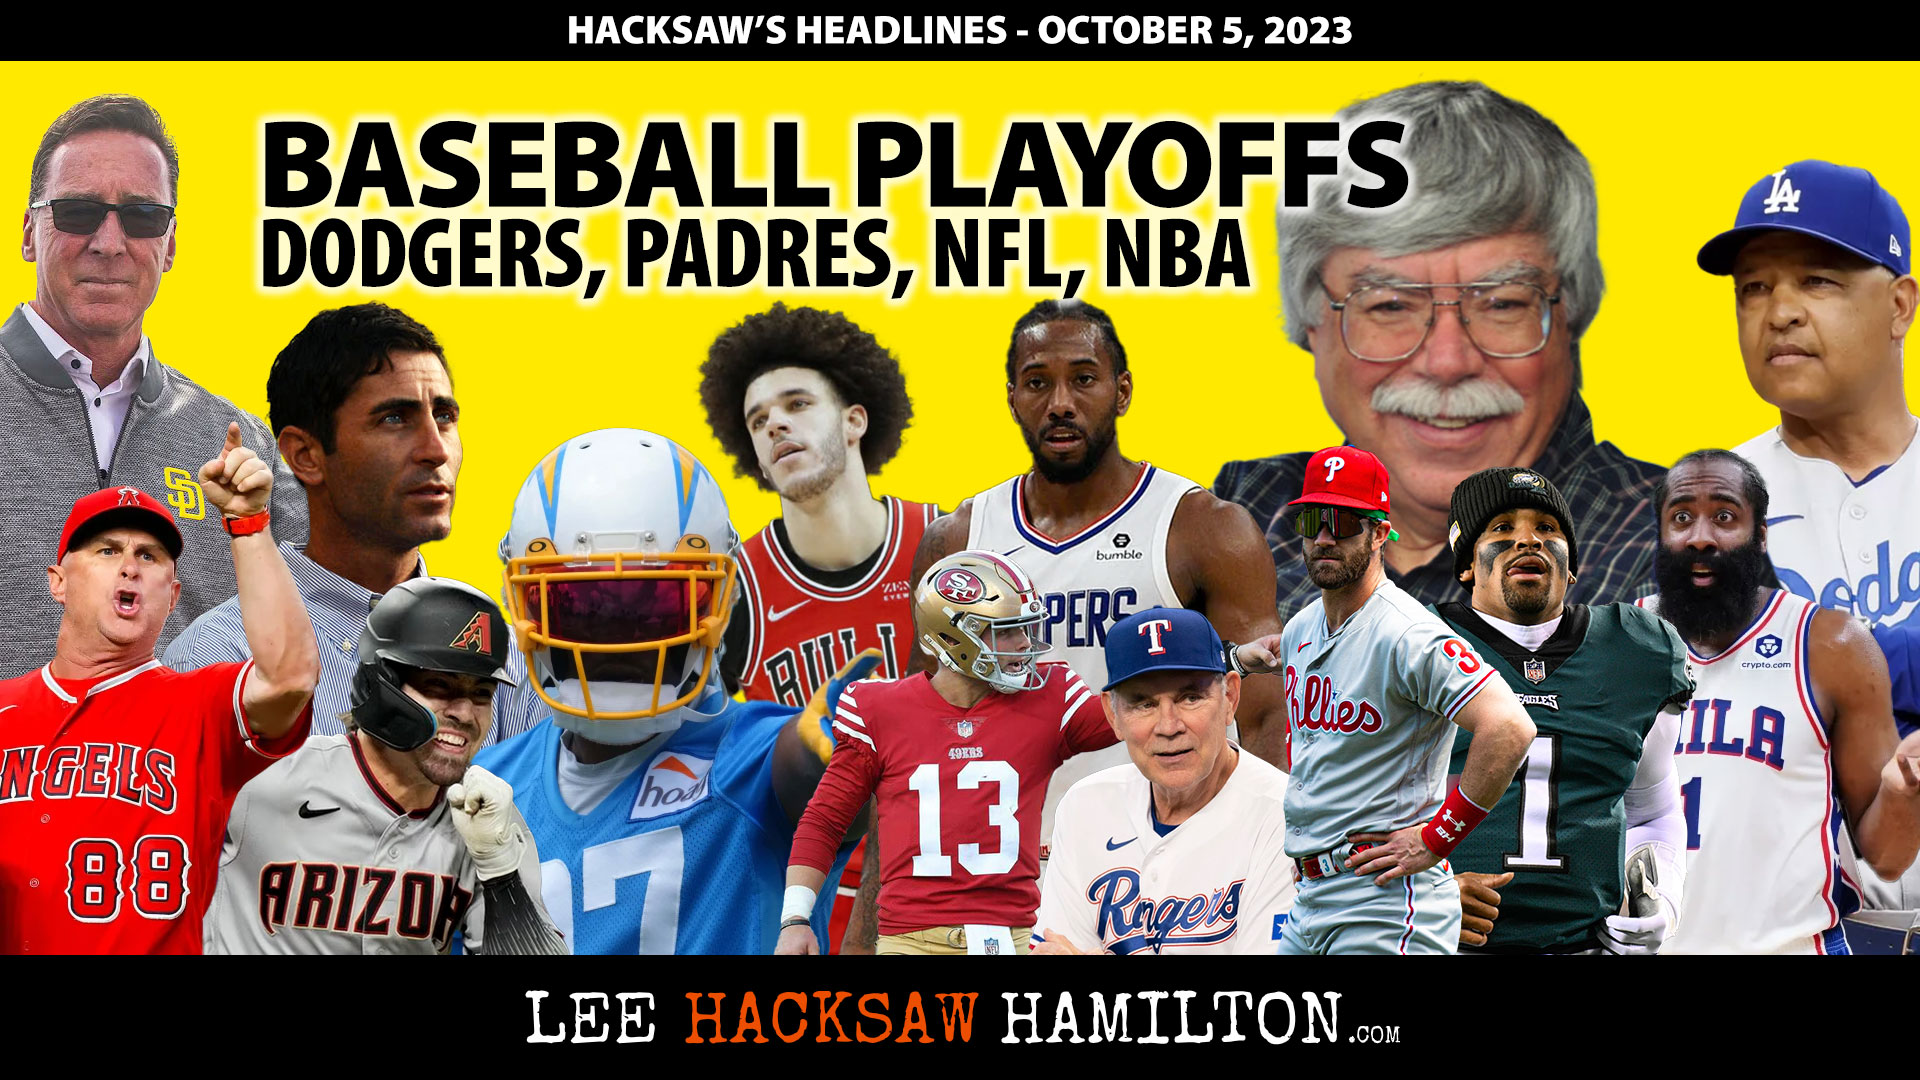 Lee Hacksaw Hamilton discusses Padres GM Denies Dysfunction, Dodgers Playoffs, Angels Phil Nevin, Chargers JC Jackson, NFL, NBA